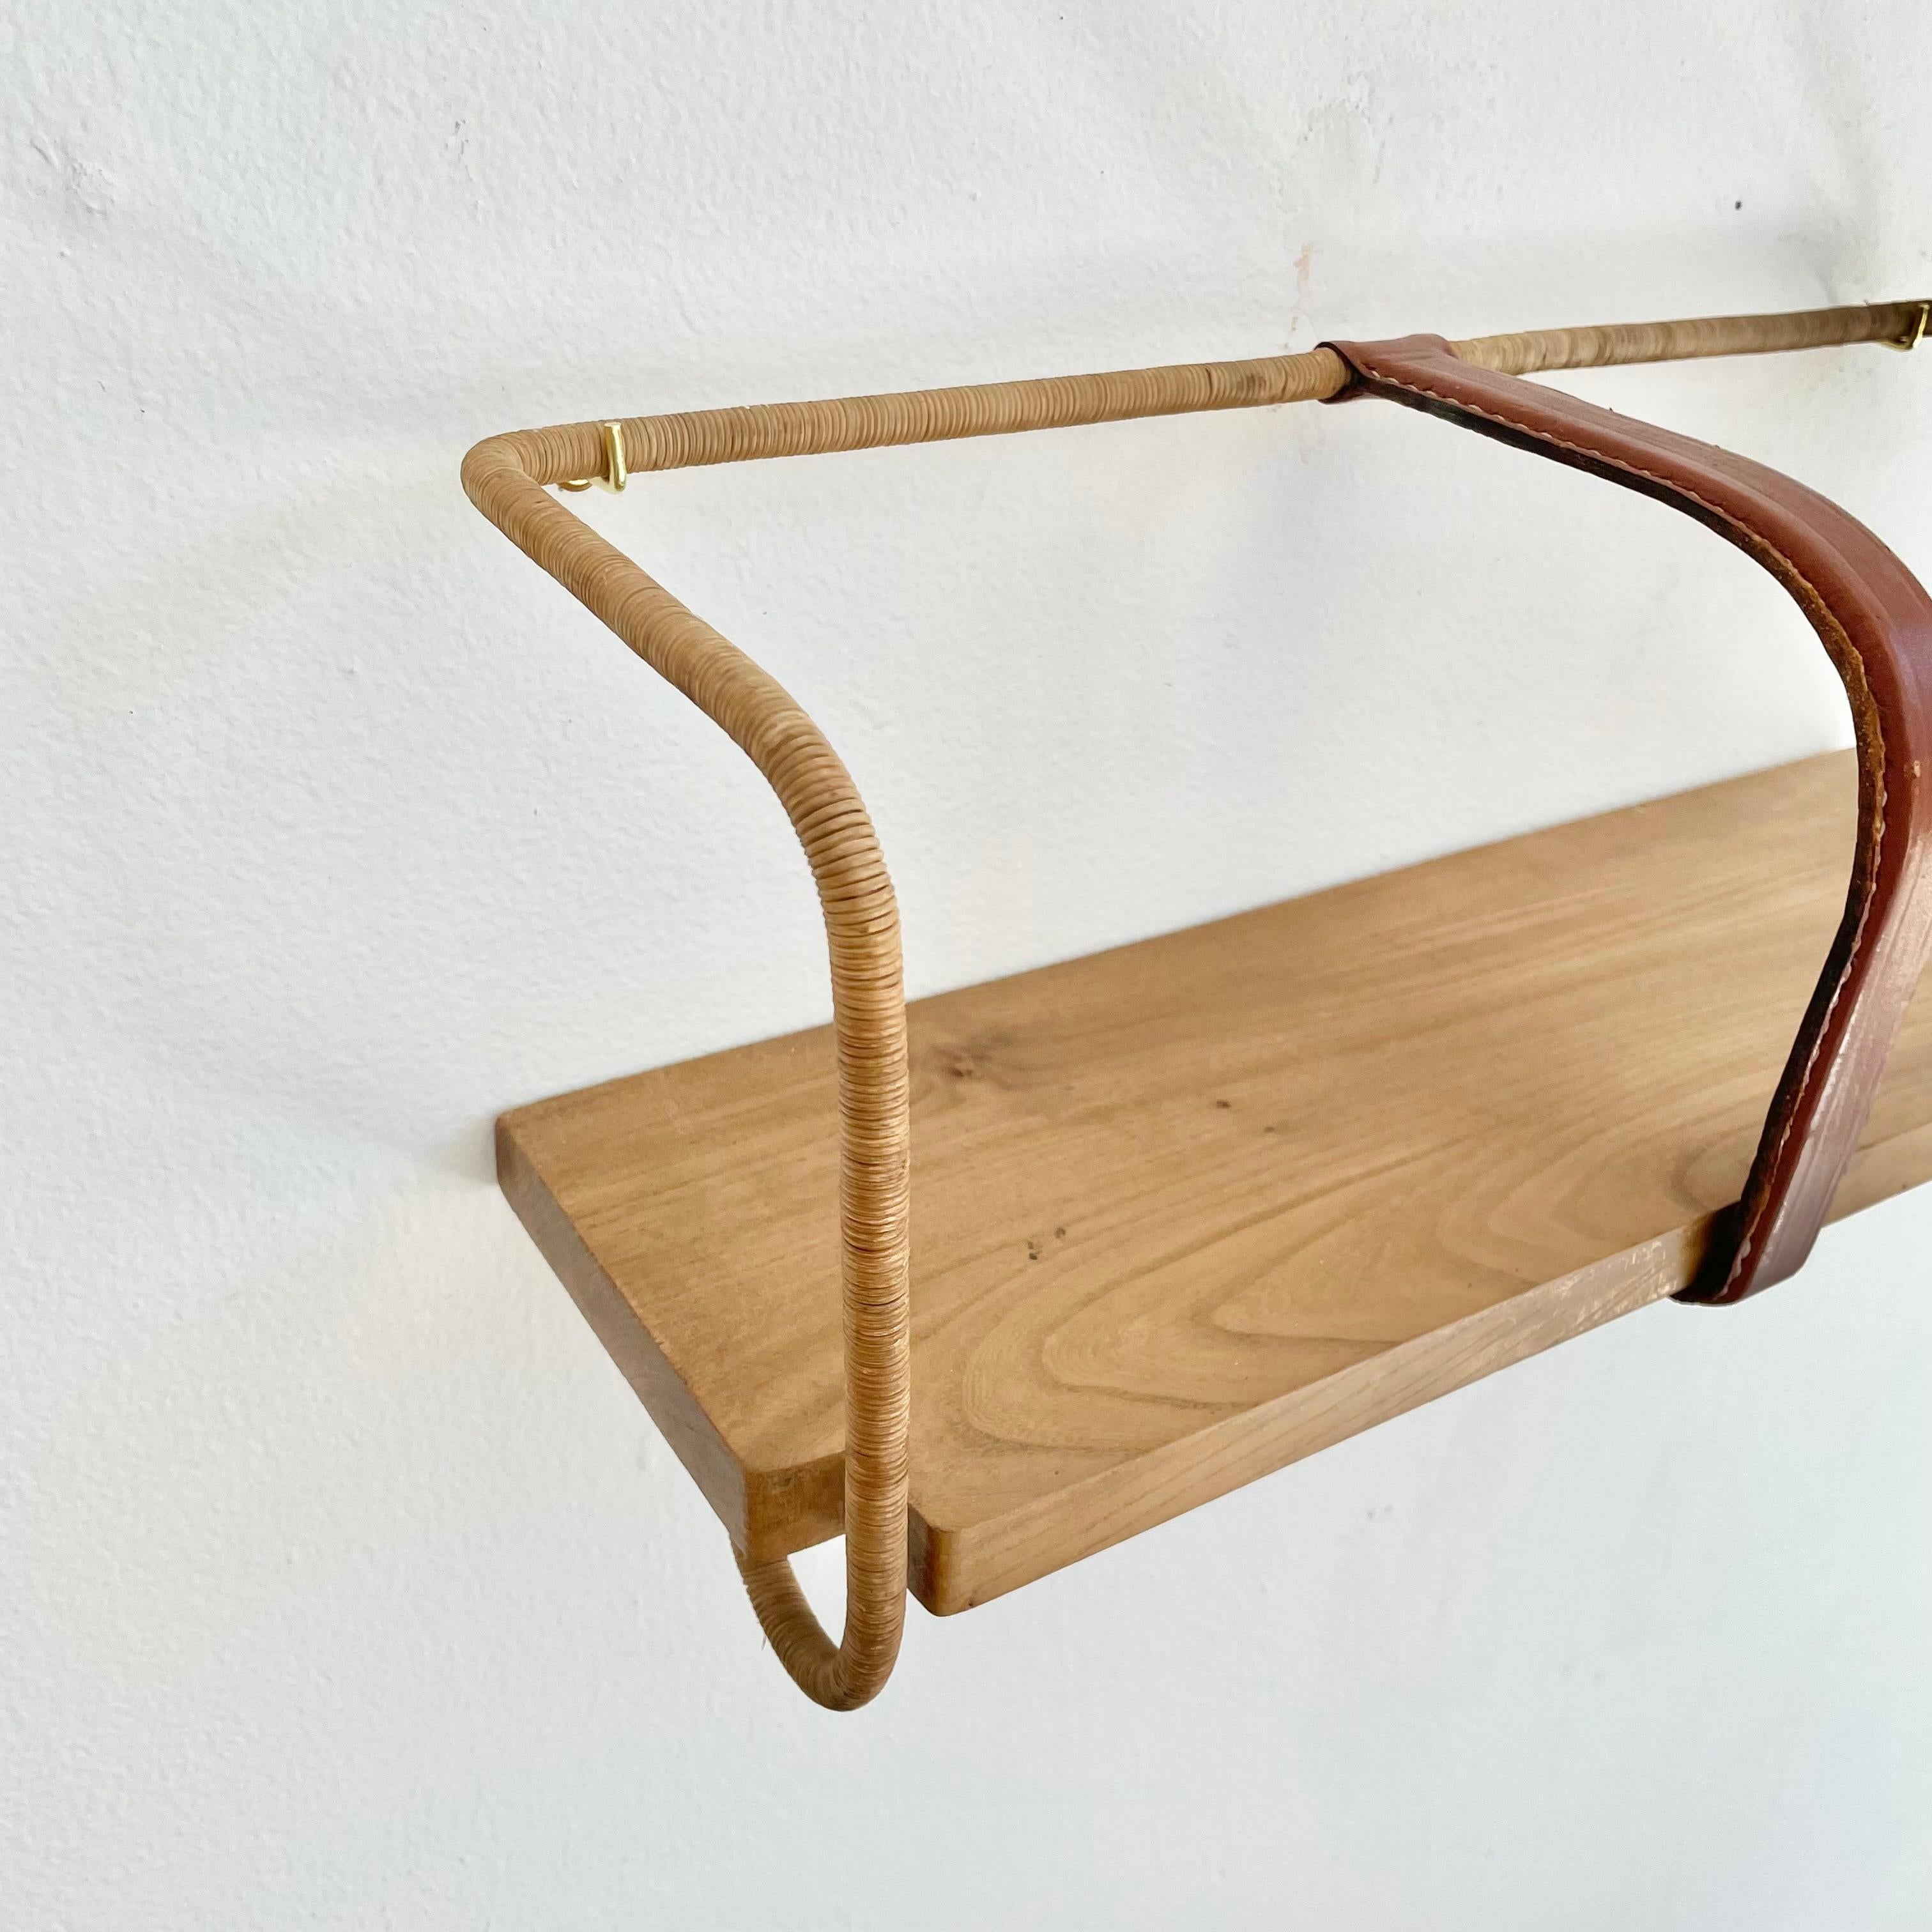 Jacques Adnet Leather, Wood and Twine Shelf, 1950s France For Sale 11